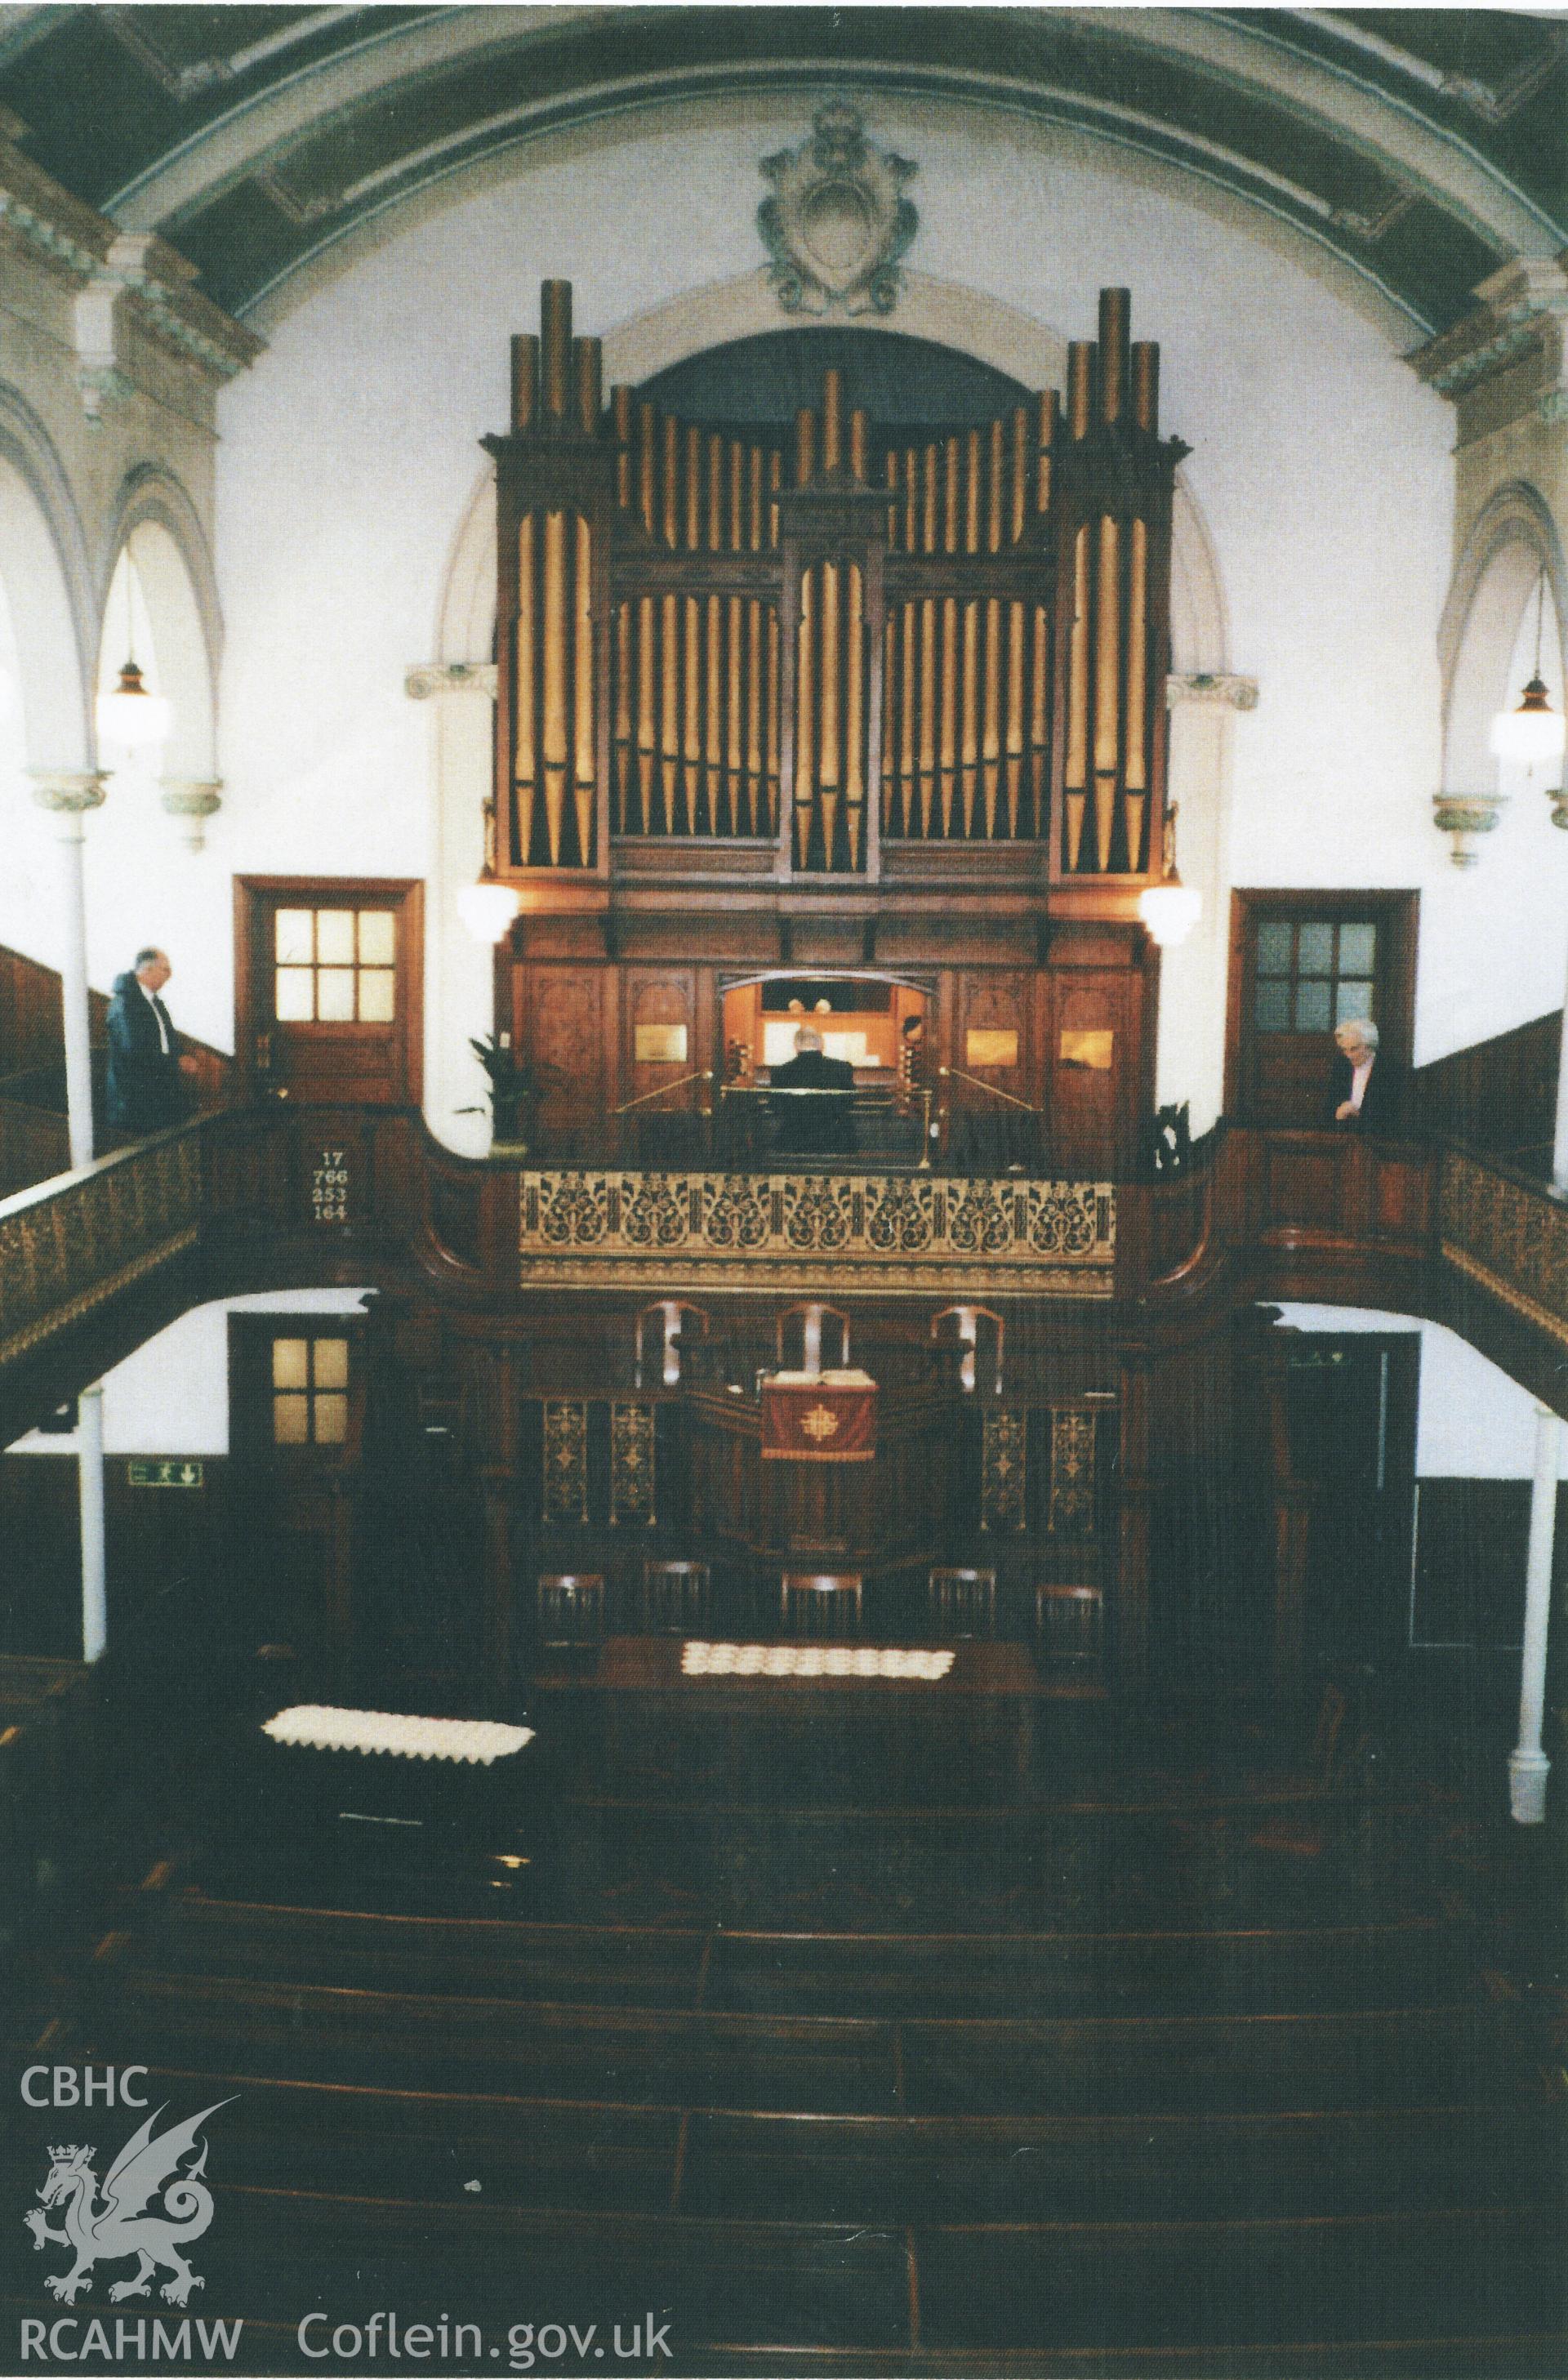 Colour photograph of past organist Aneurin Thomas, playing the organ for the last time, 2003. Donated to the RCAHMW by Cyril Philips as part of the Digital Dissent Project.